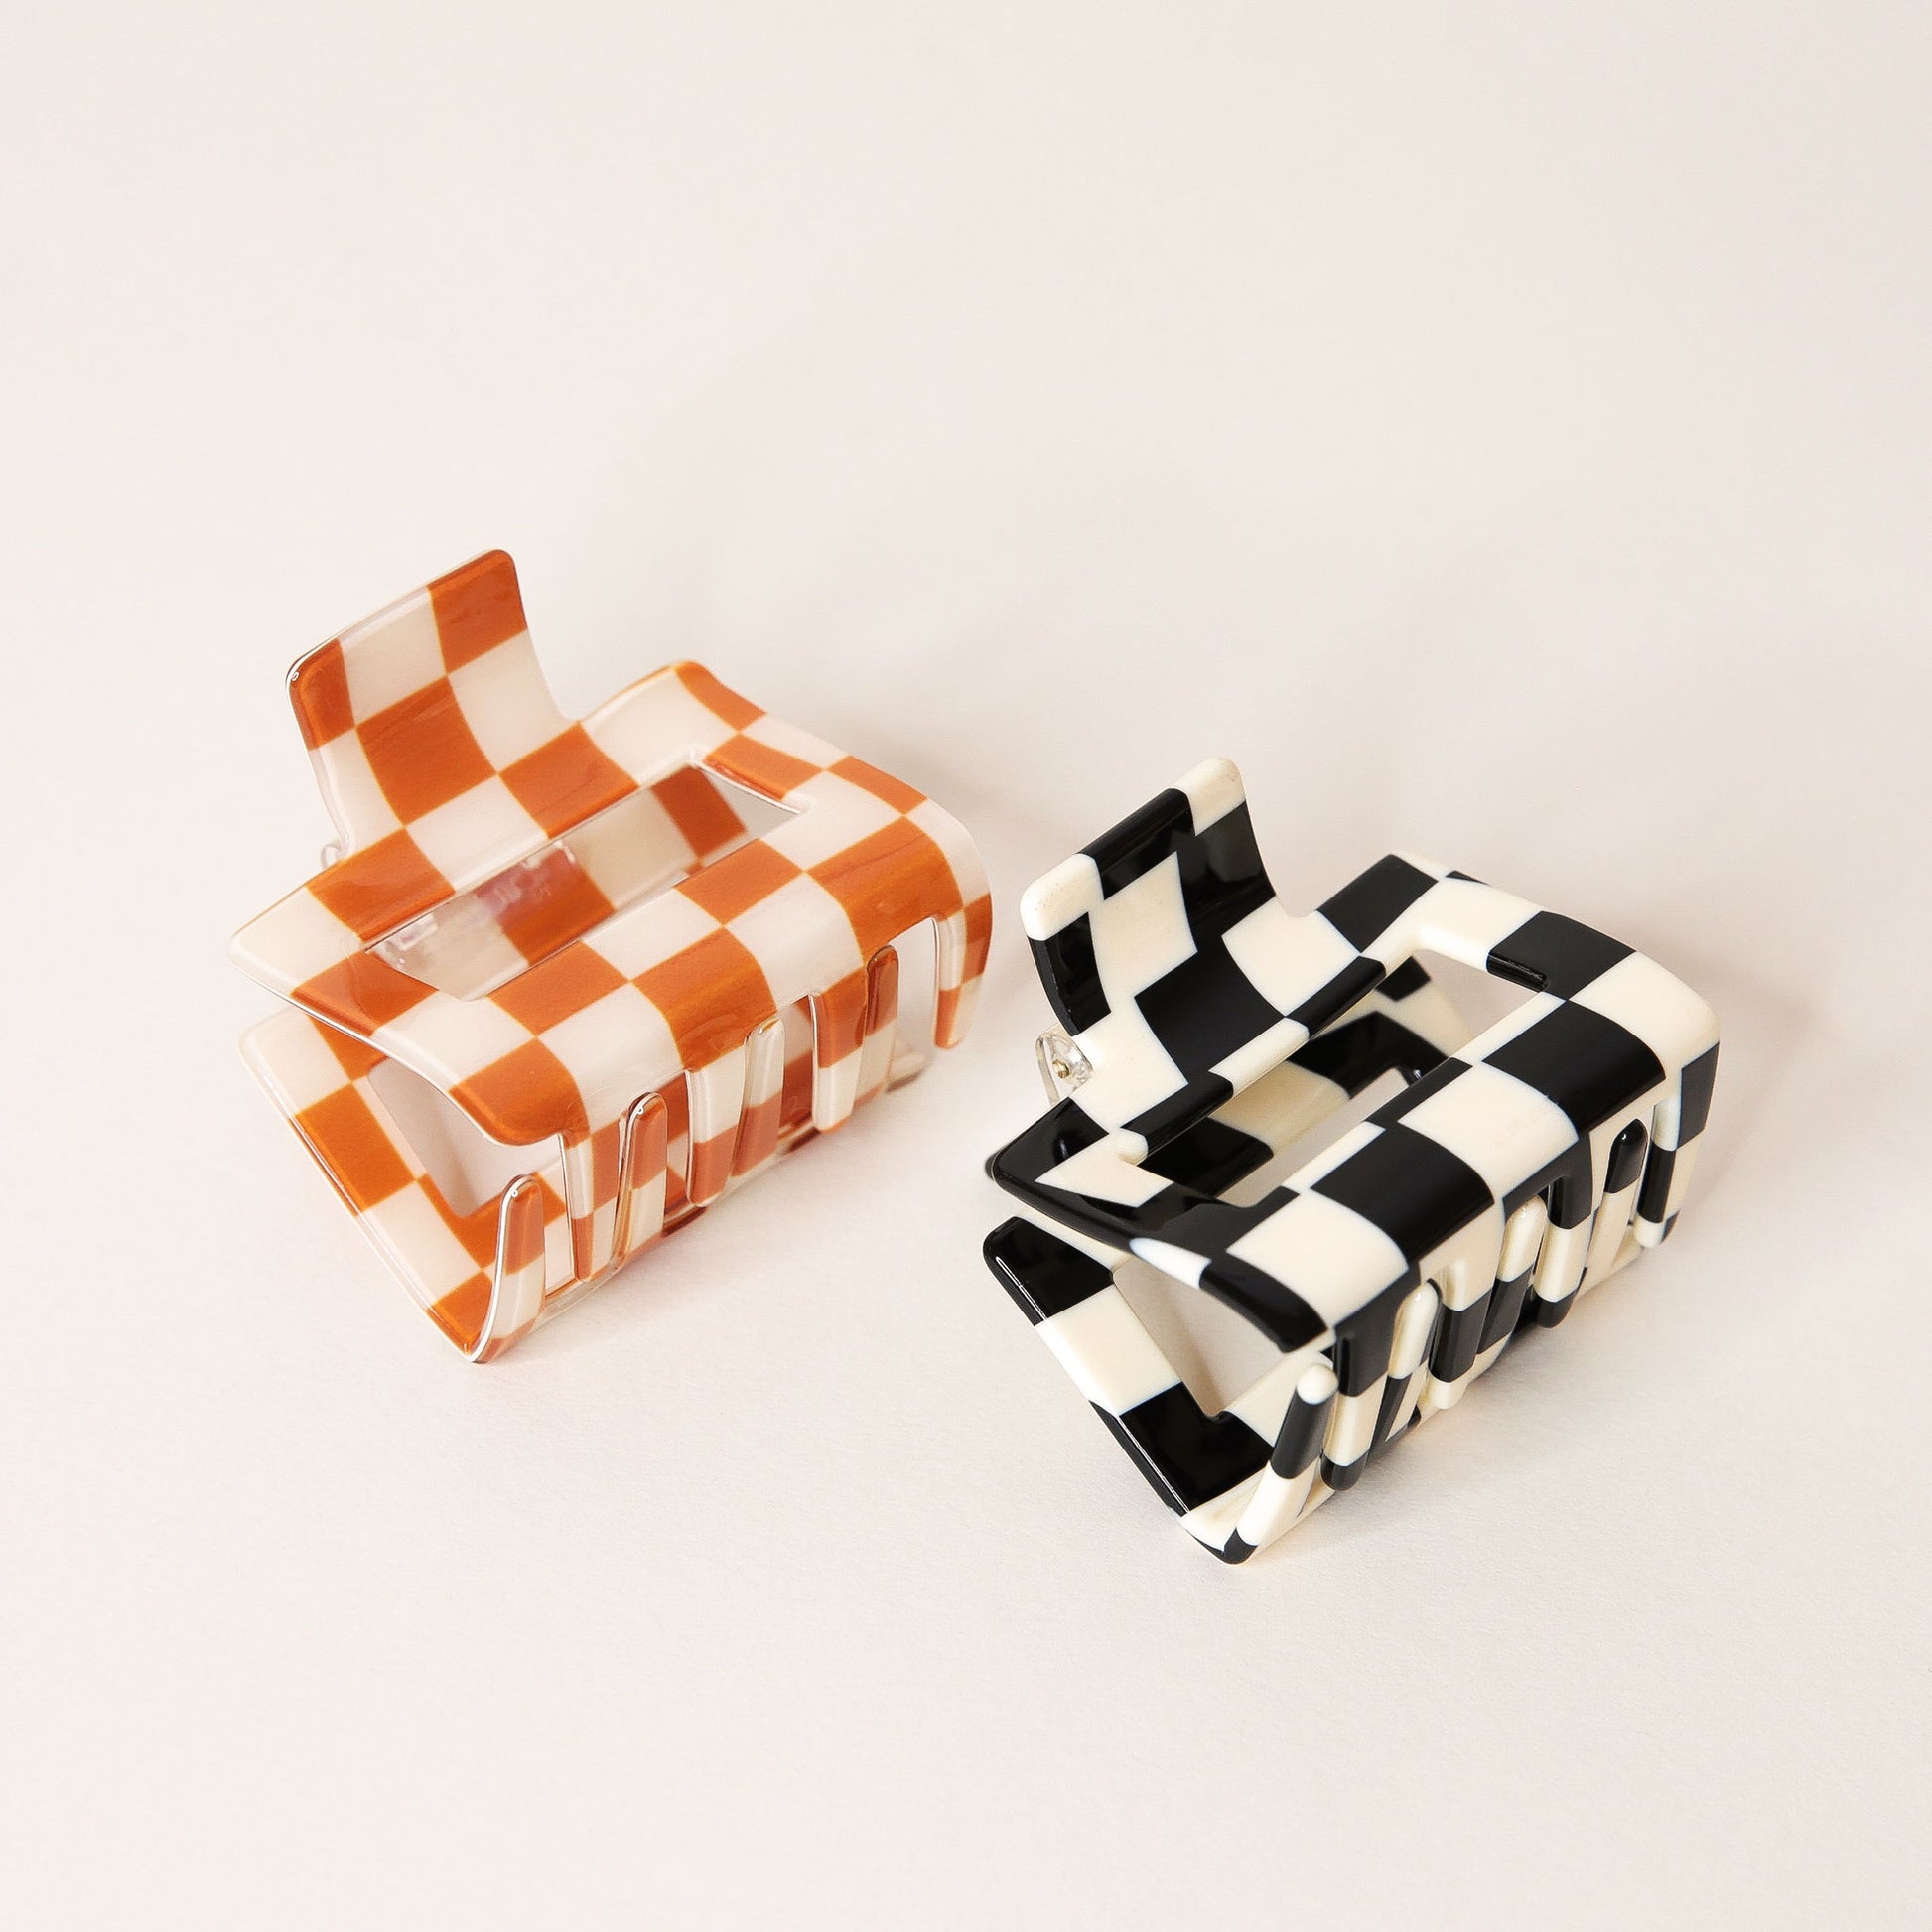 Two checkered claw hair clips in shades of orange and black. Each is a square shape and has two simple geometric cutouts.